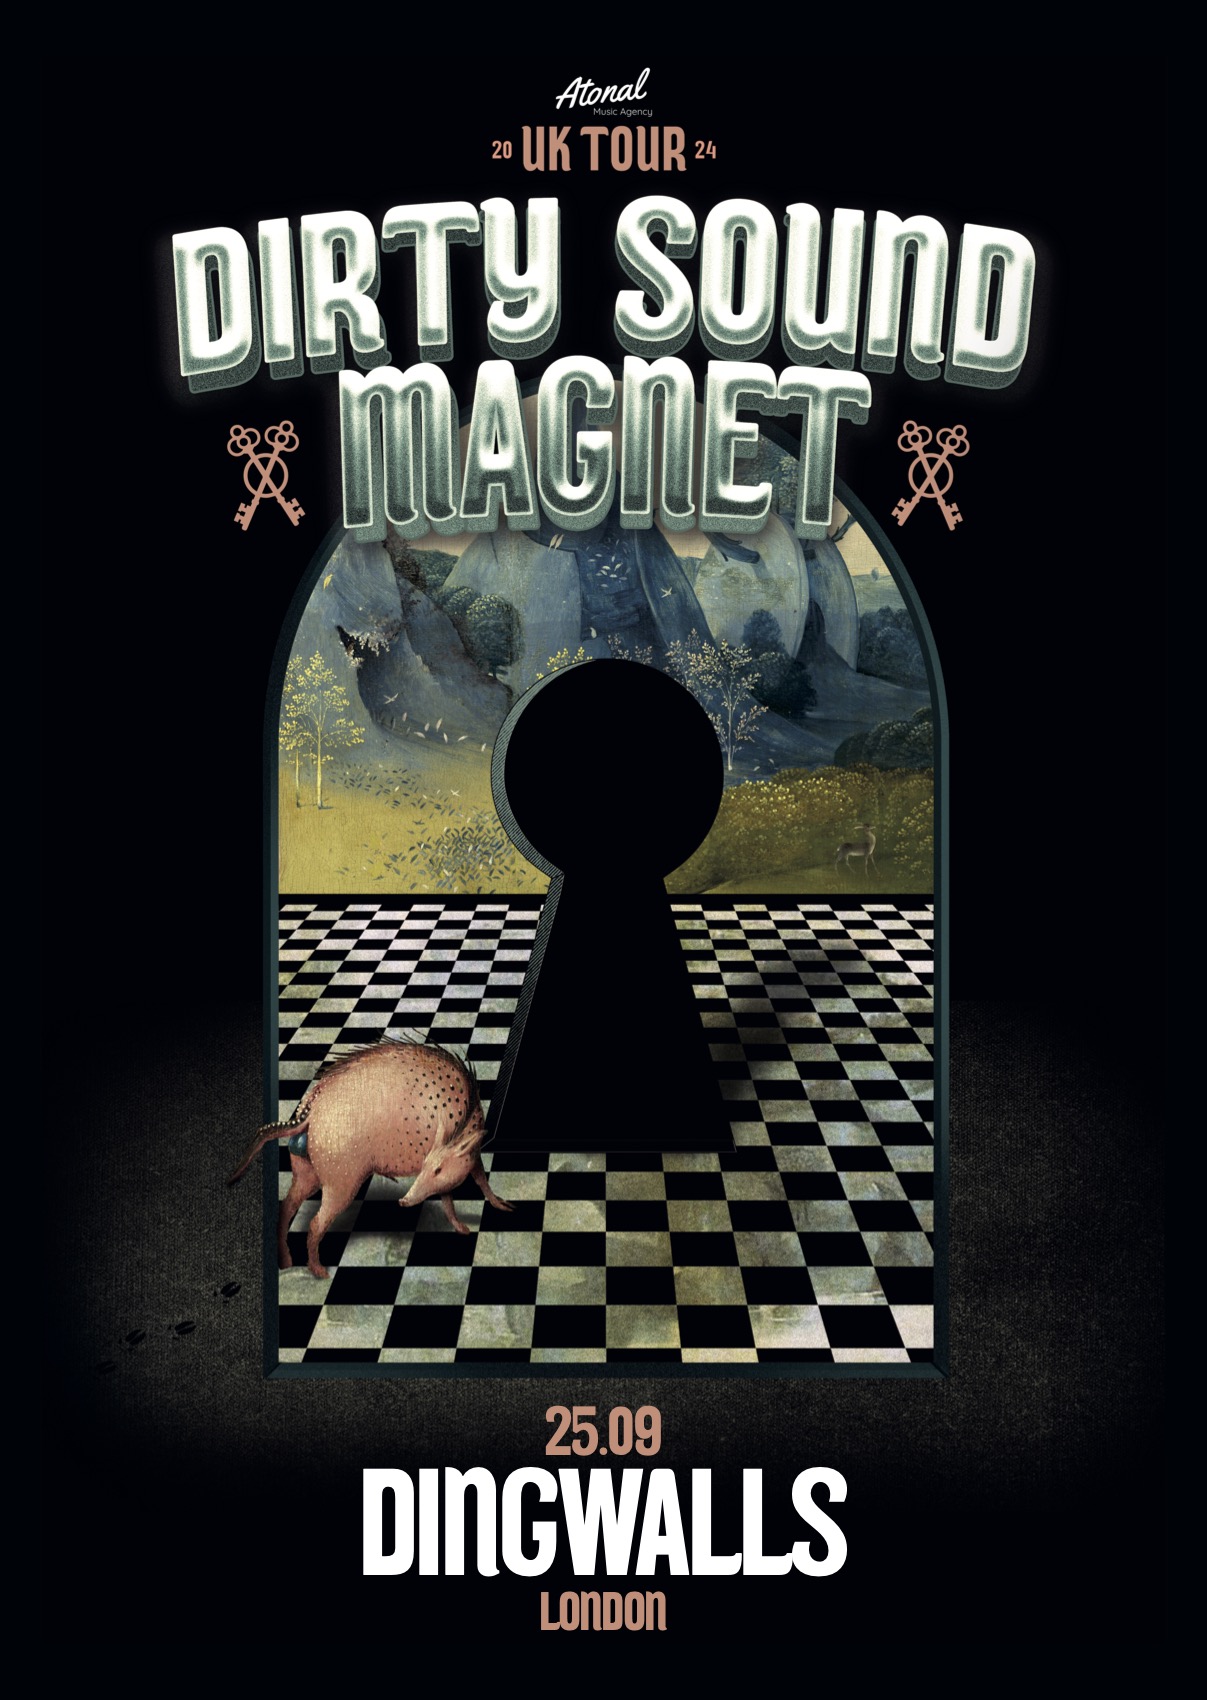 Experience the Shamanic Energy of Dirty Sound Magnet's Psychedelic Rock Live in London!